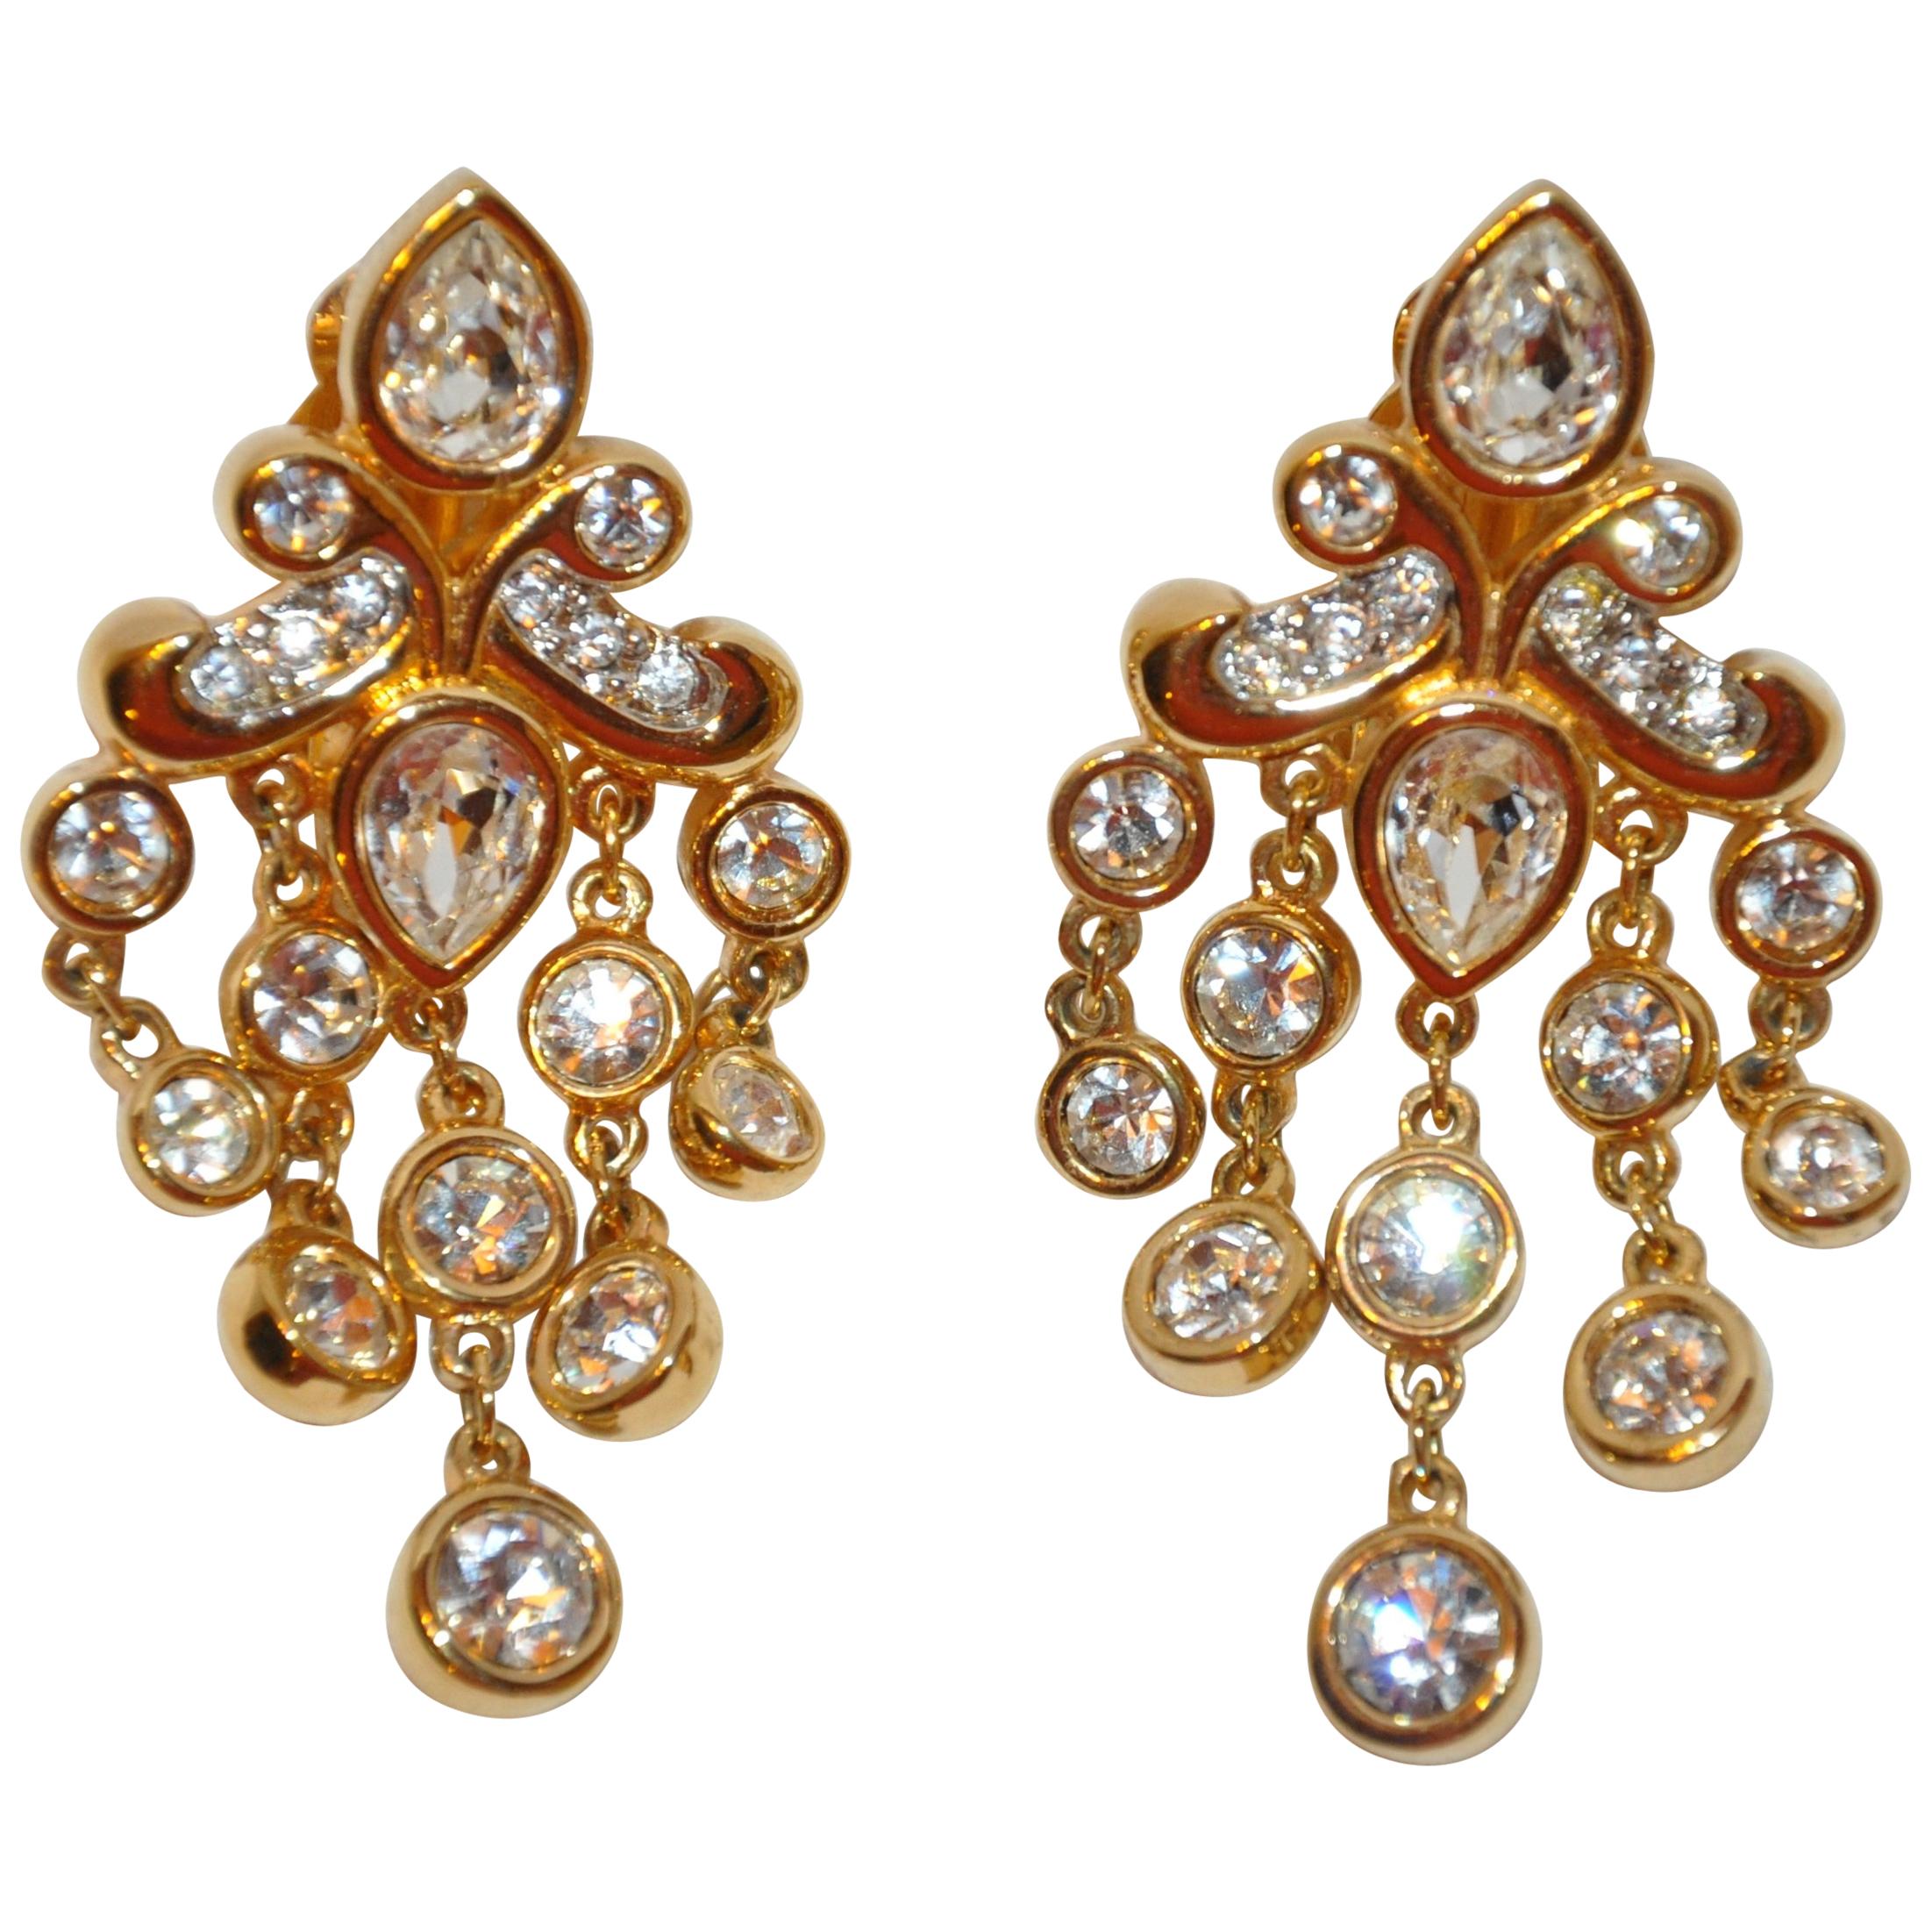 Polished Gilded Gold Vermeil Hardware "Chandelier" Earrings with Faux Diamonds For Sale